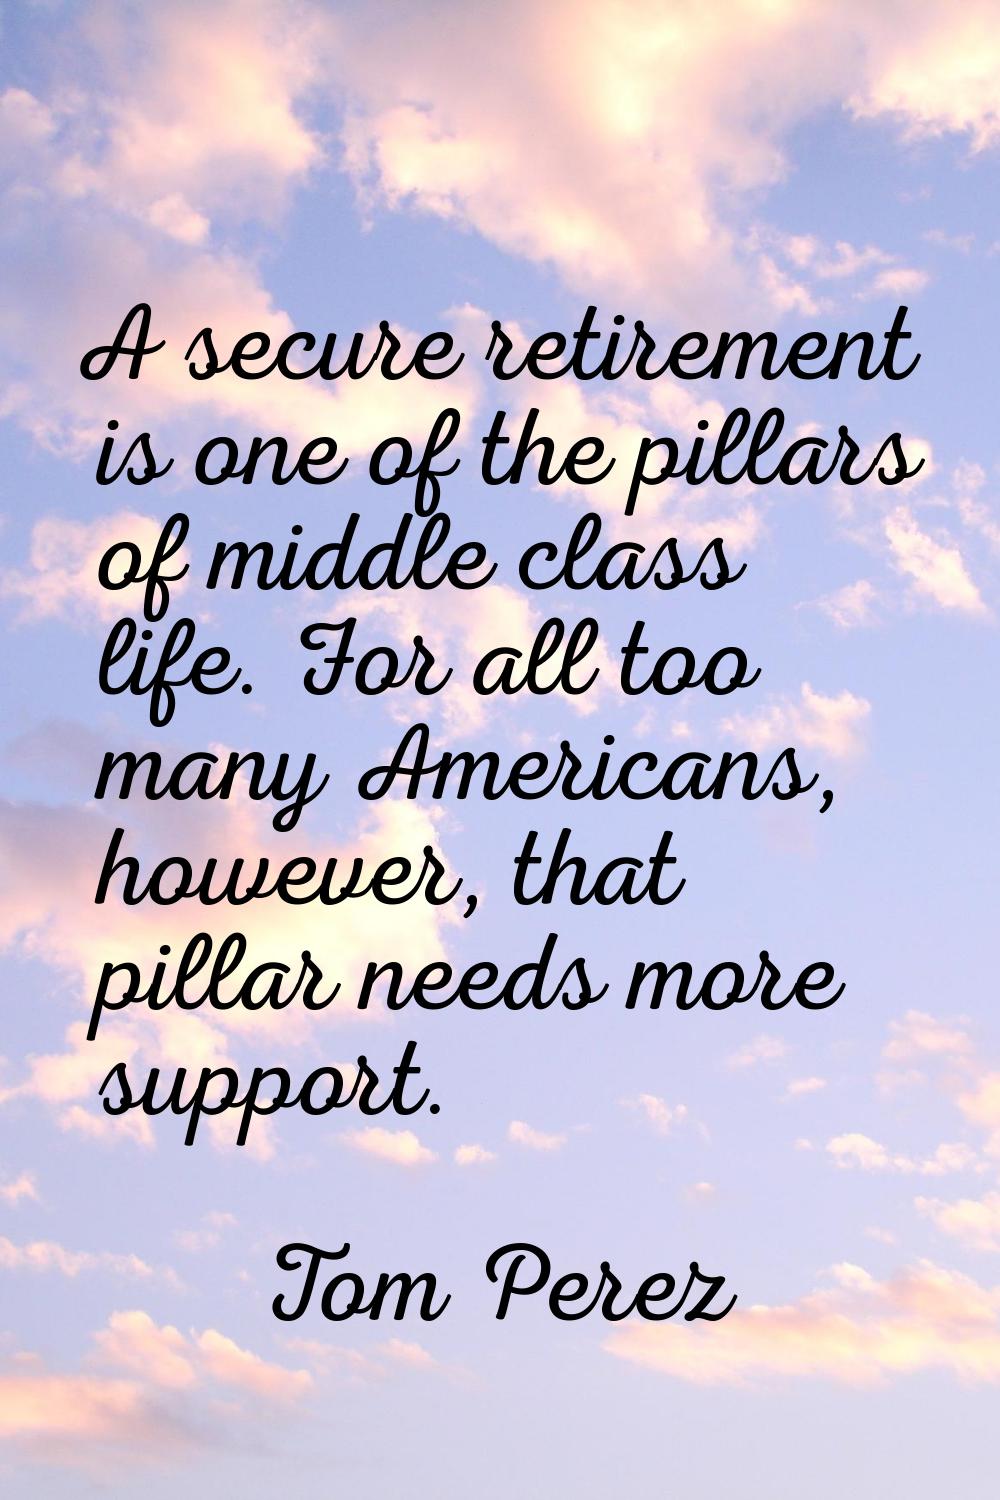 A secure retirement is one of the pillars of middle class life. For all too many Americans, however